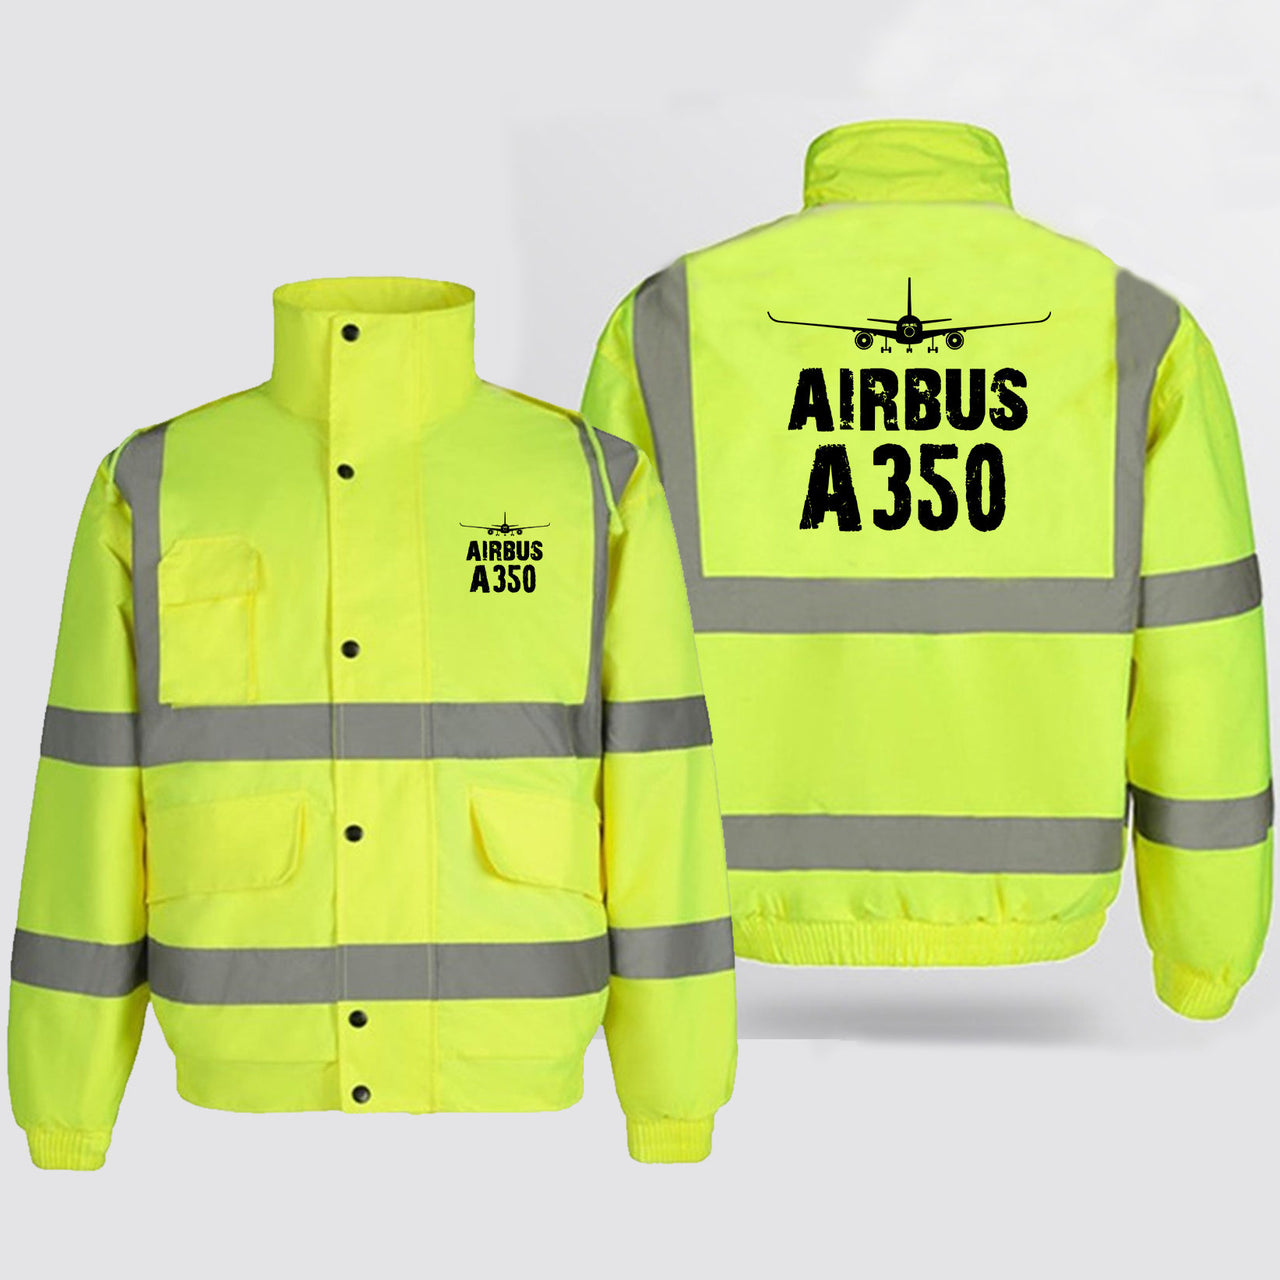 Airbus A350 & Plane Designed Reflective Winter Jackets